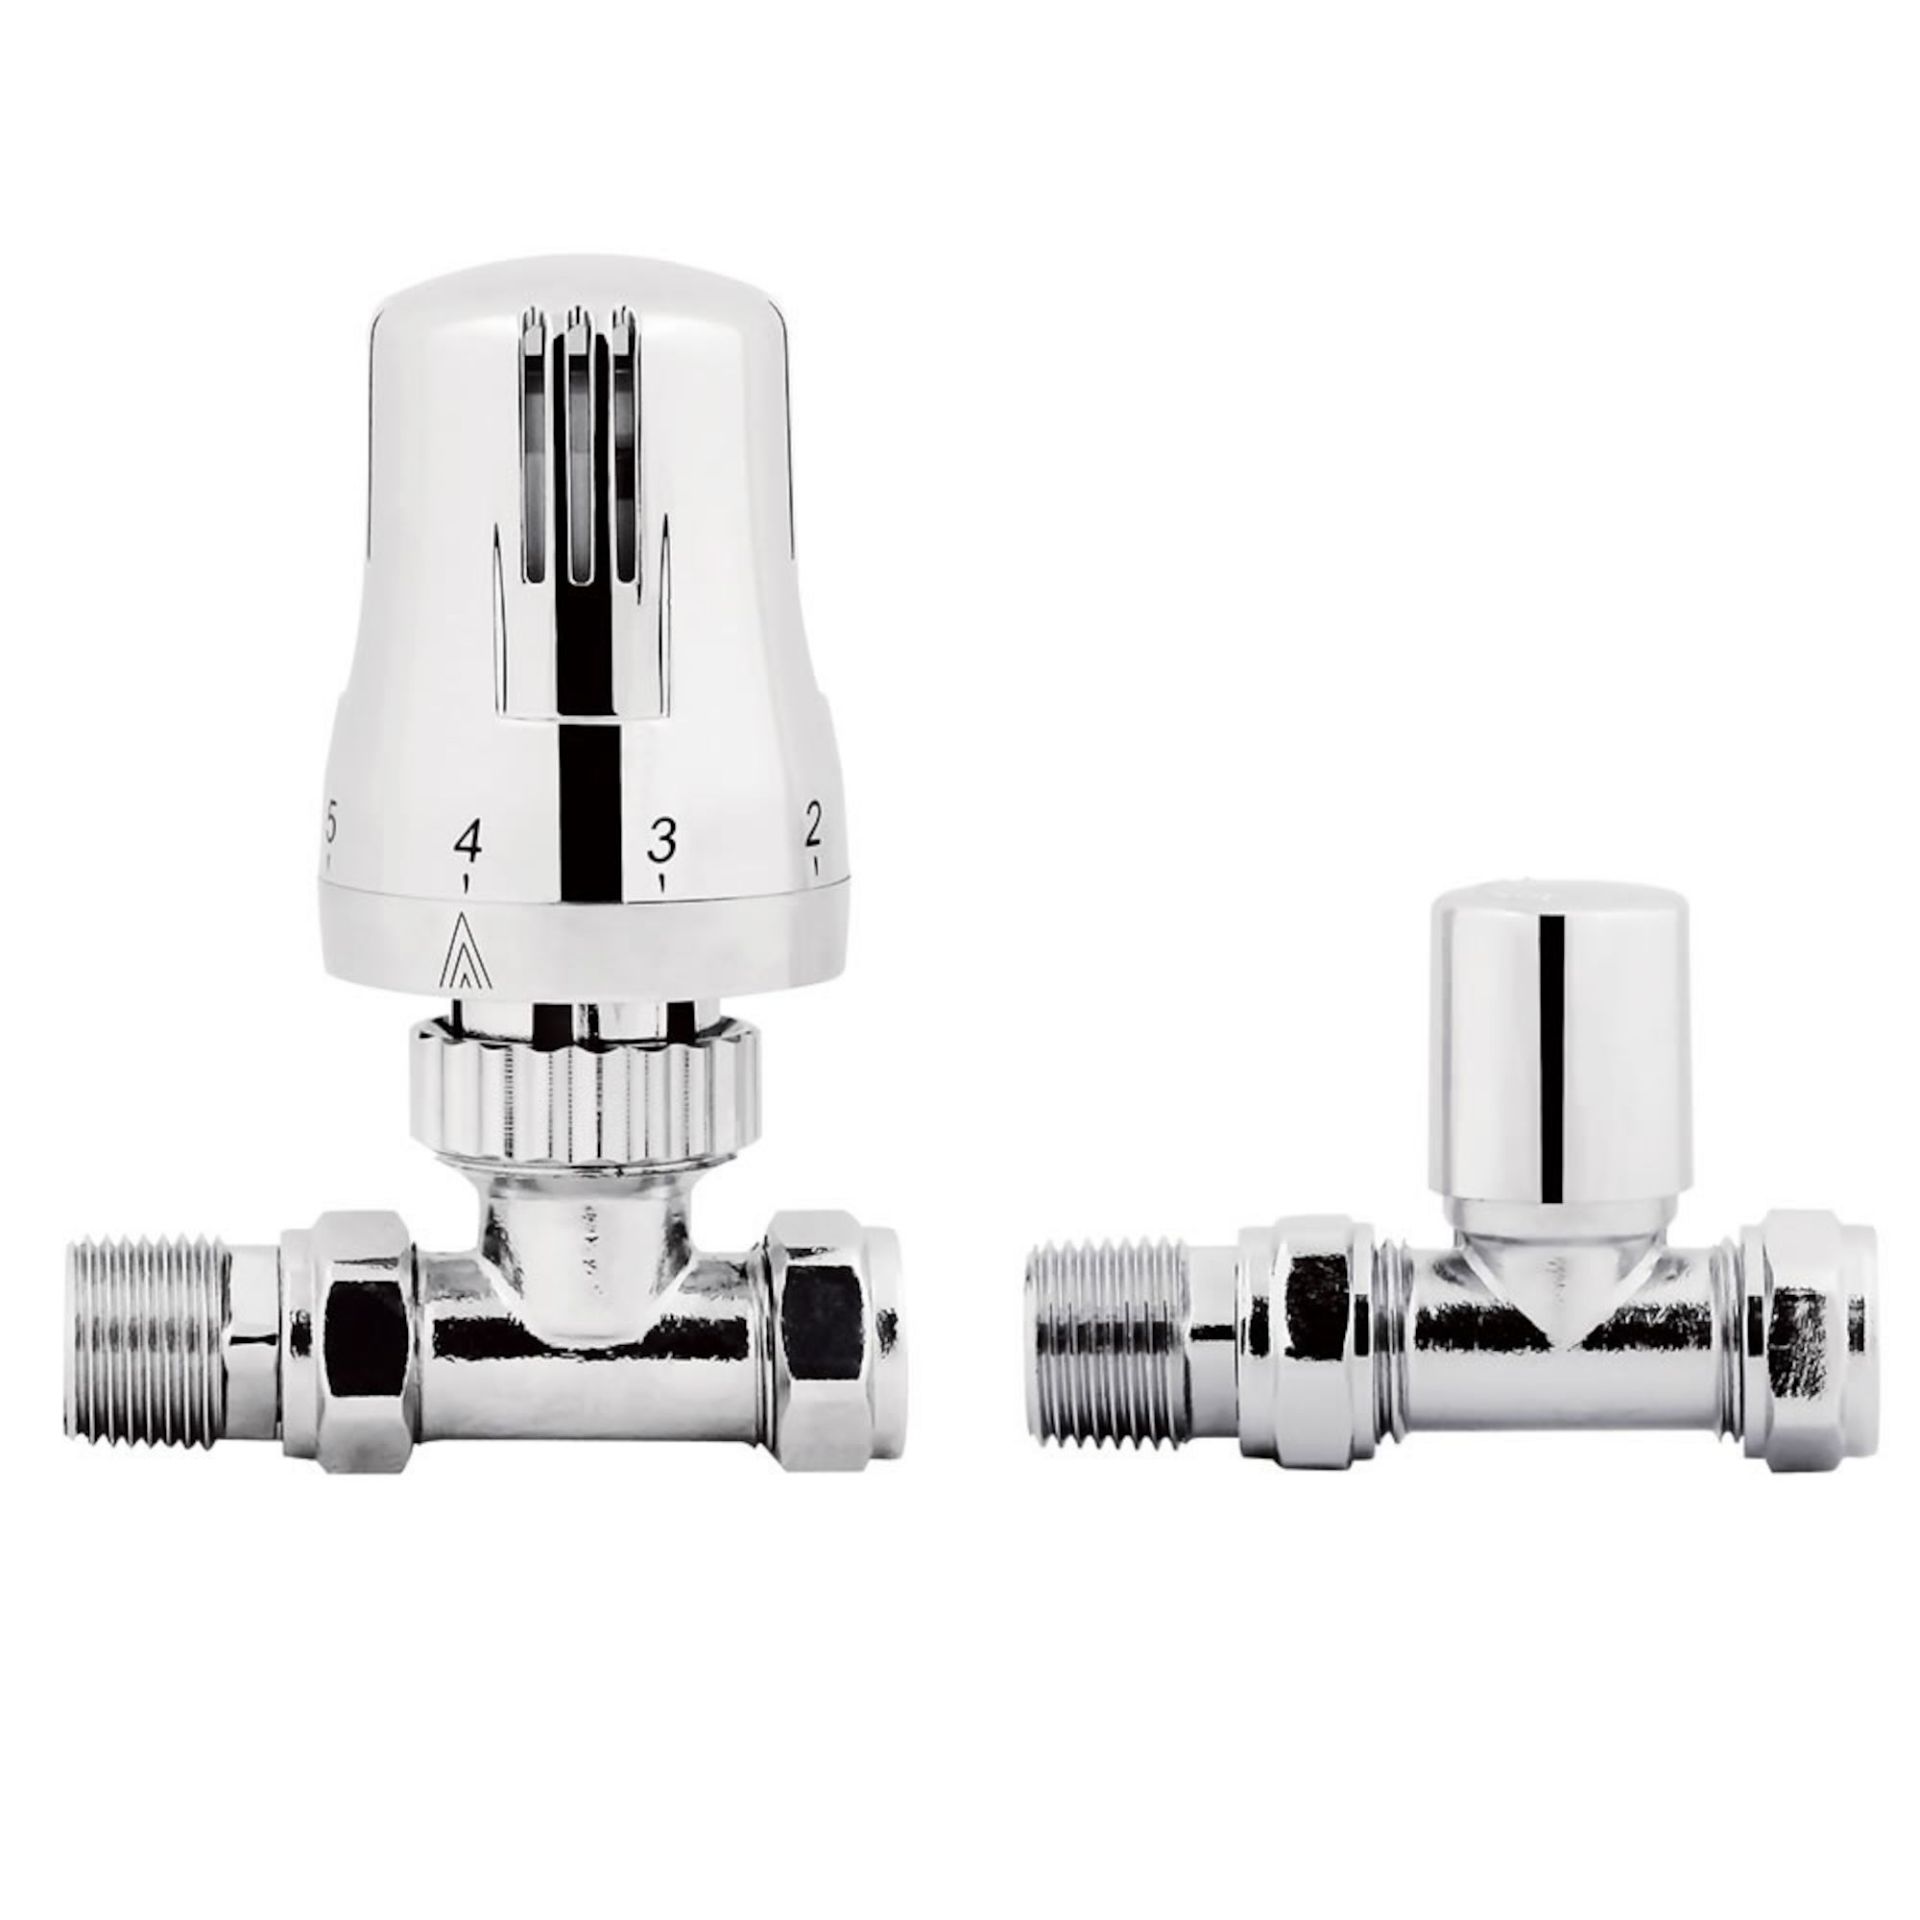 (NF103) 15mm Standard Connection Thermostatic Straight Chrome Radiator Valves Chrome Plated Solid